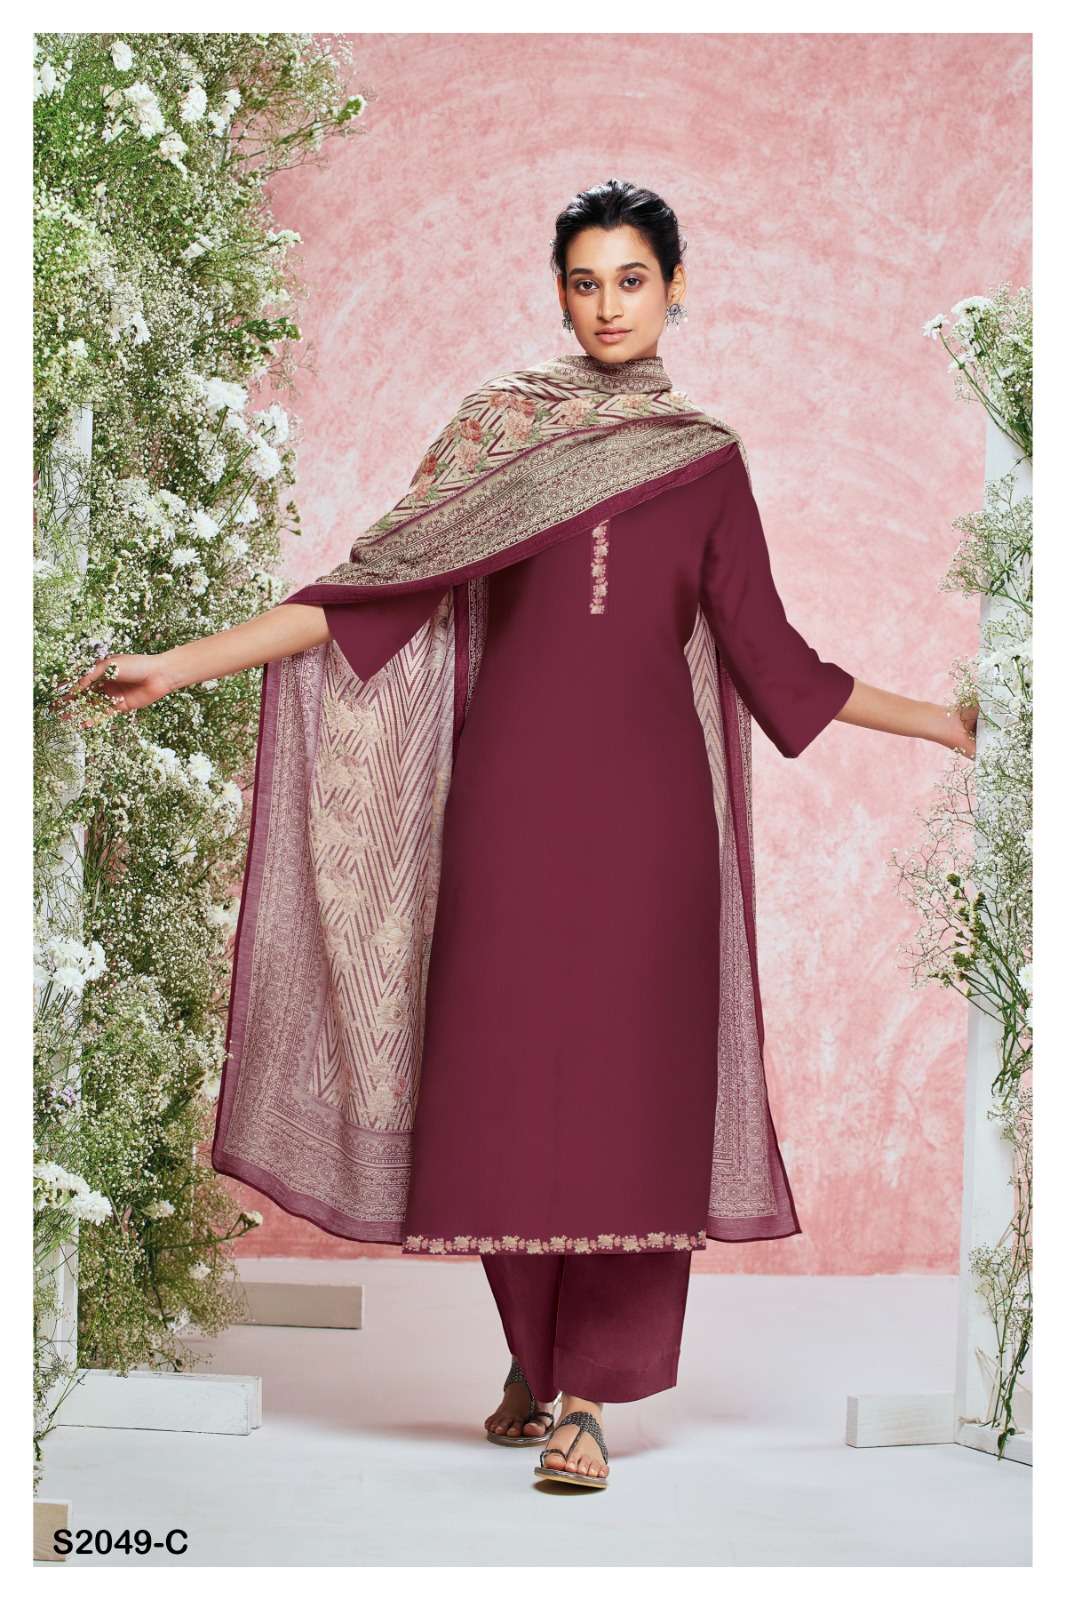 Red Raas Crepe Suit Unstitched Suit With Crochet lace – Kalasheel